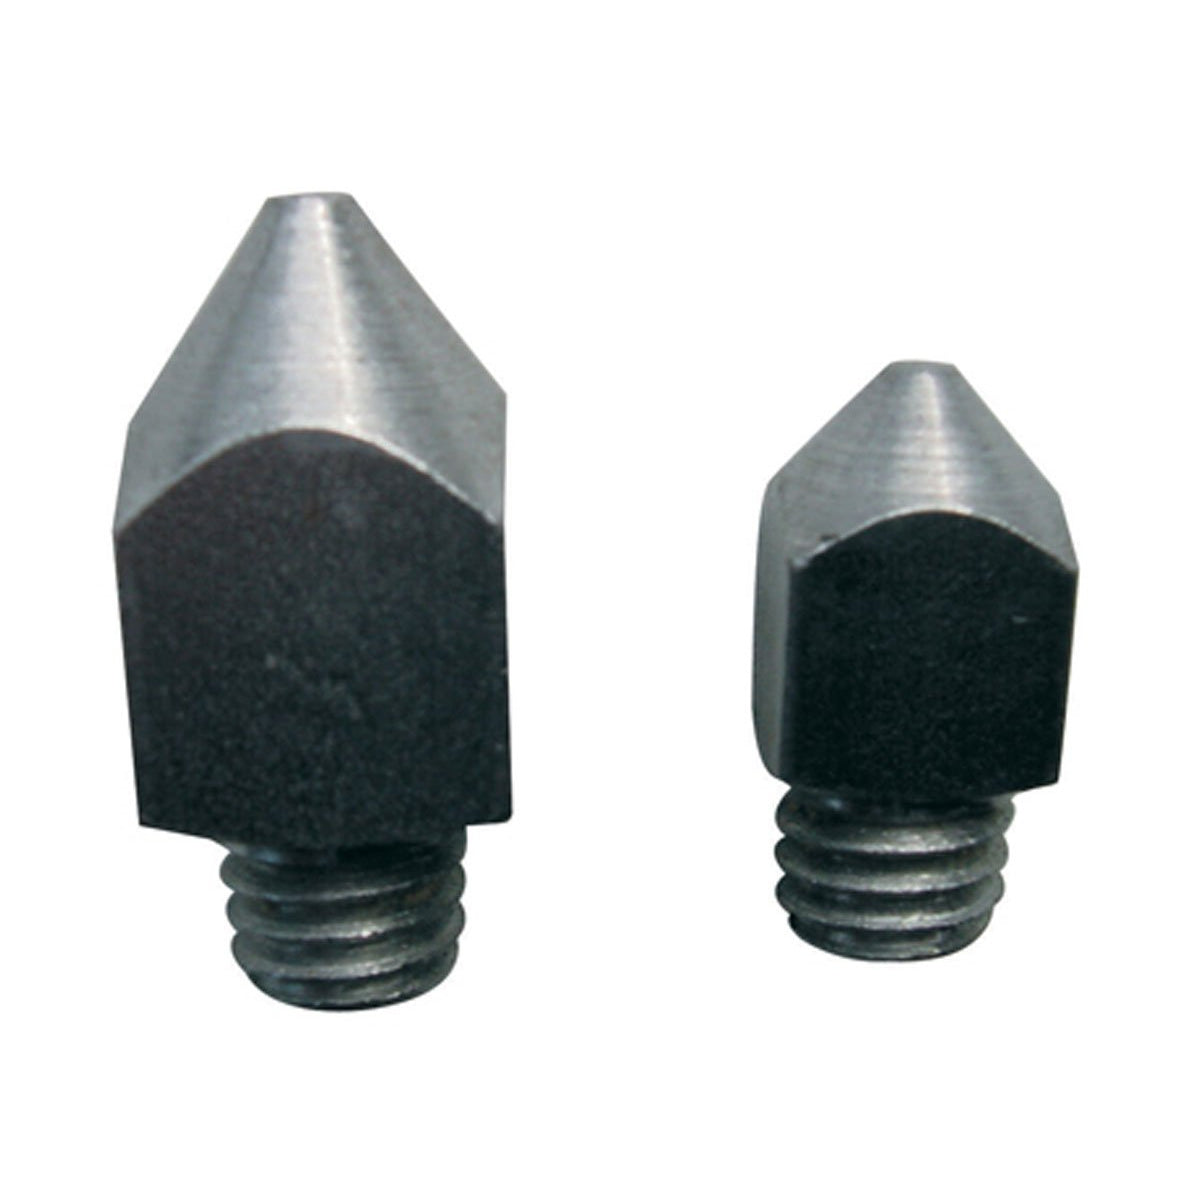 Stromsholm Screw In Studs Rounded Jumping RJ - 4 Pack